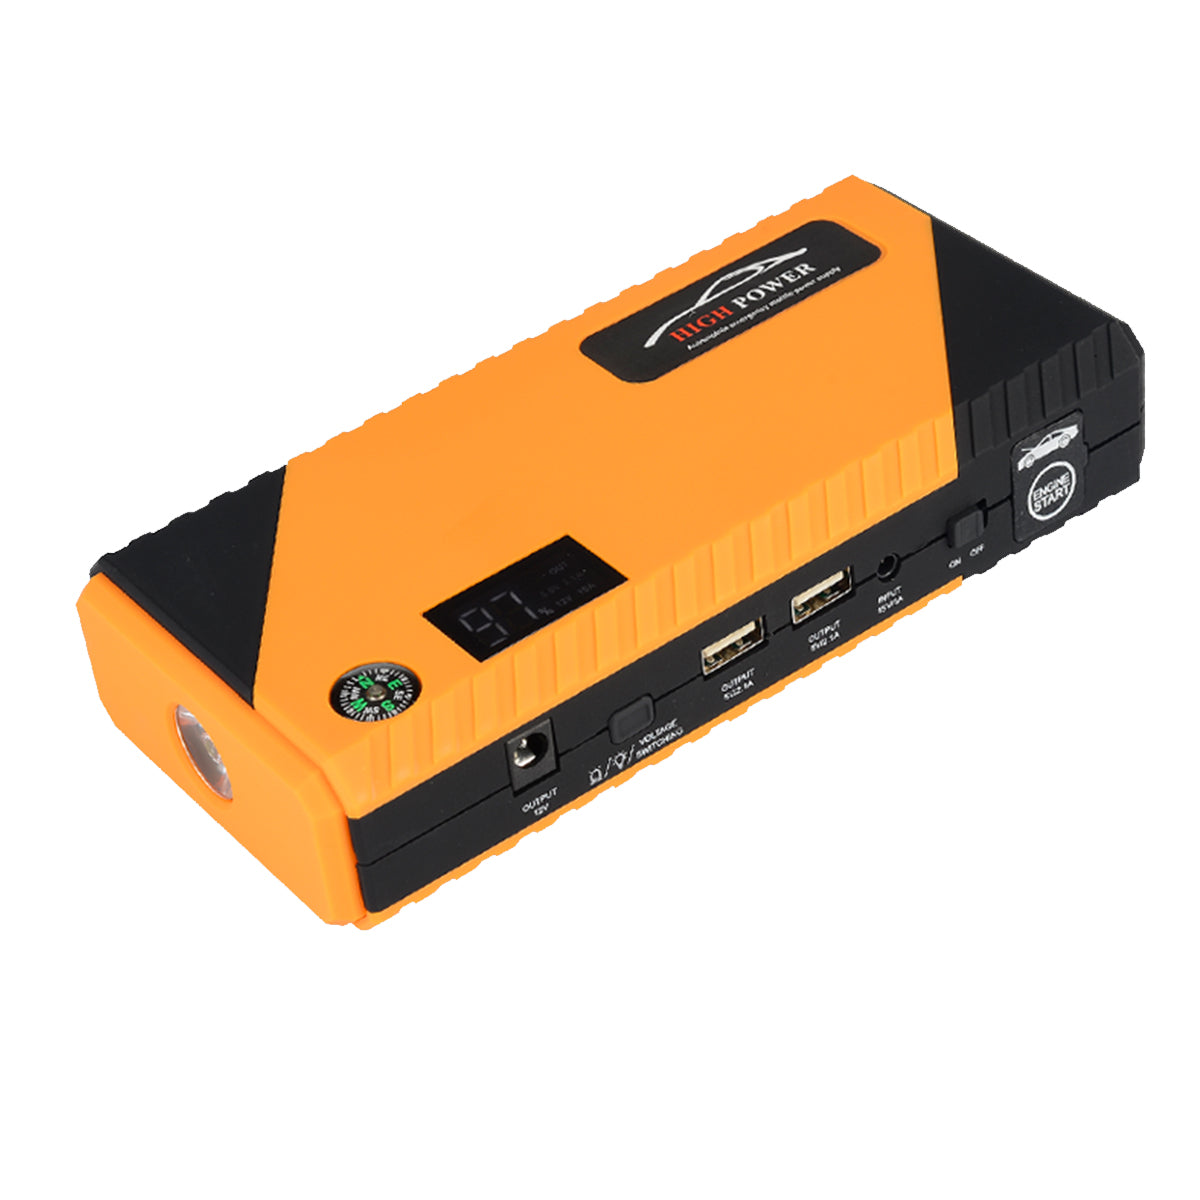 Coral JX31 Display 98600mAh 12V Car Jump Starter Portable USB Emergency Power Bank Battery Booster Clamp 1000A DC Port Yellow